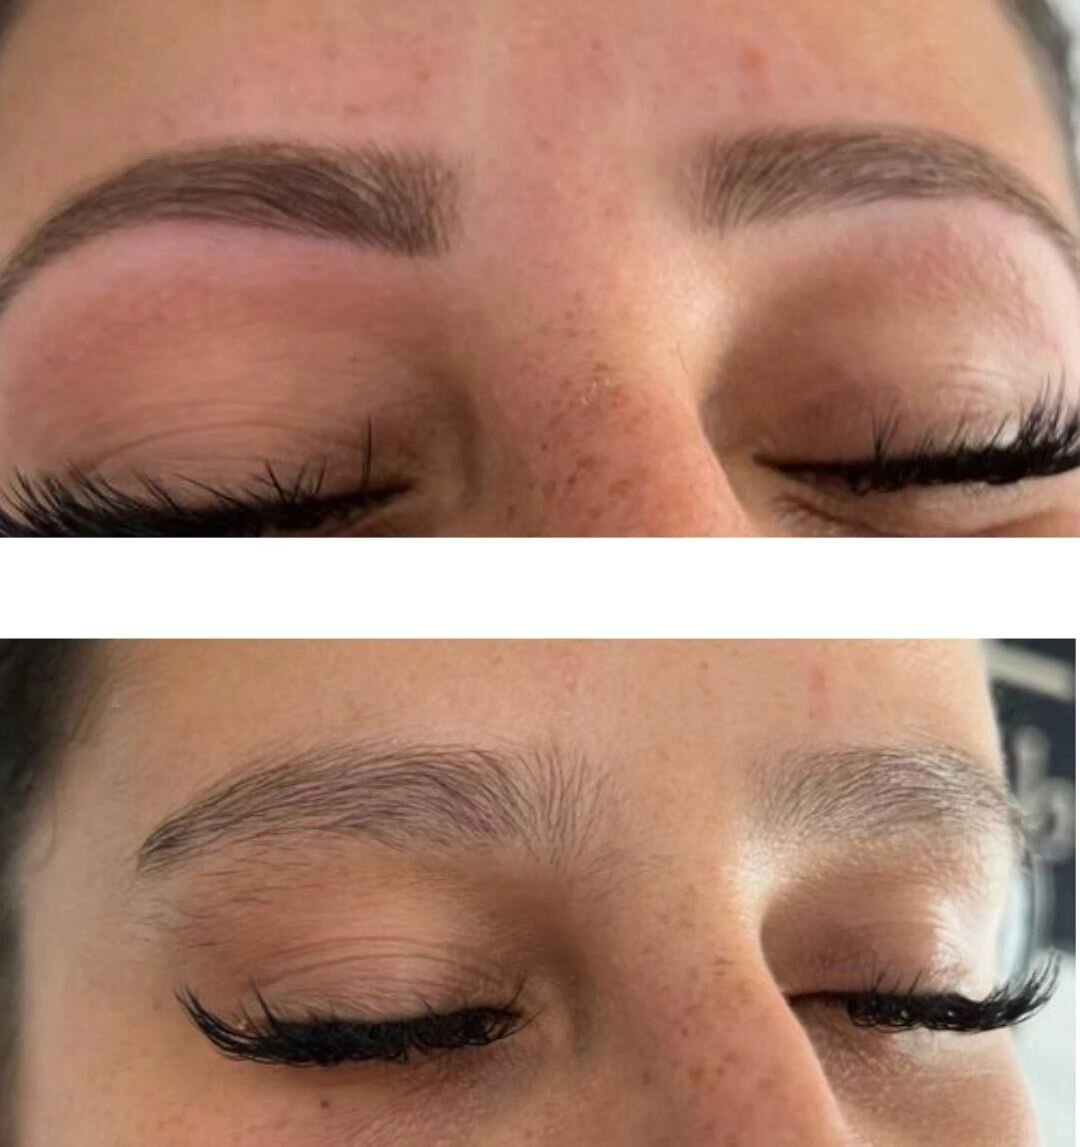 ✨️Eyebrow Transformation✨️

Eyebrows done at Beauty Addix Hair Salon &amp; Spa! 

🚨 Need a hair service done? New to Beauty Addix? We're pleased to announce our offer of 25% OFF for new hair clients. LIMITED AVAILABILITY, so you don't want to miss o